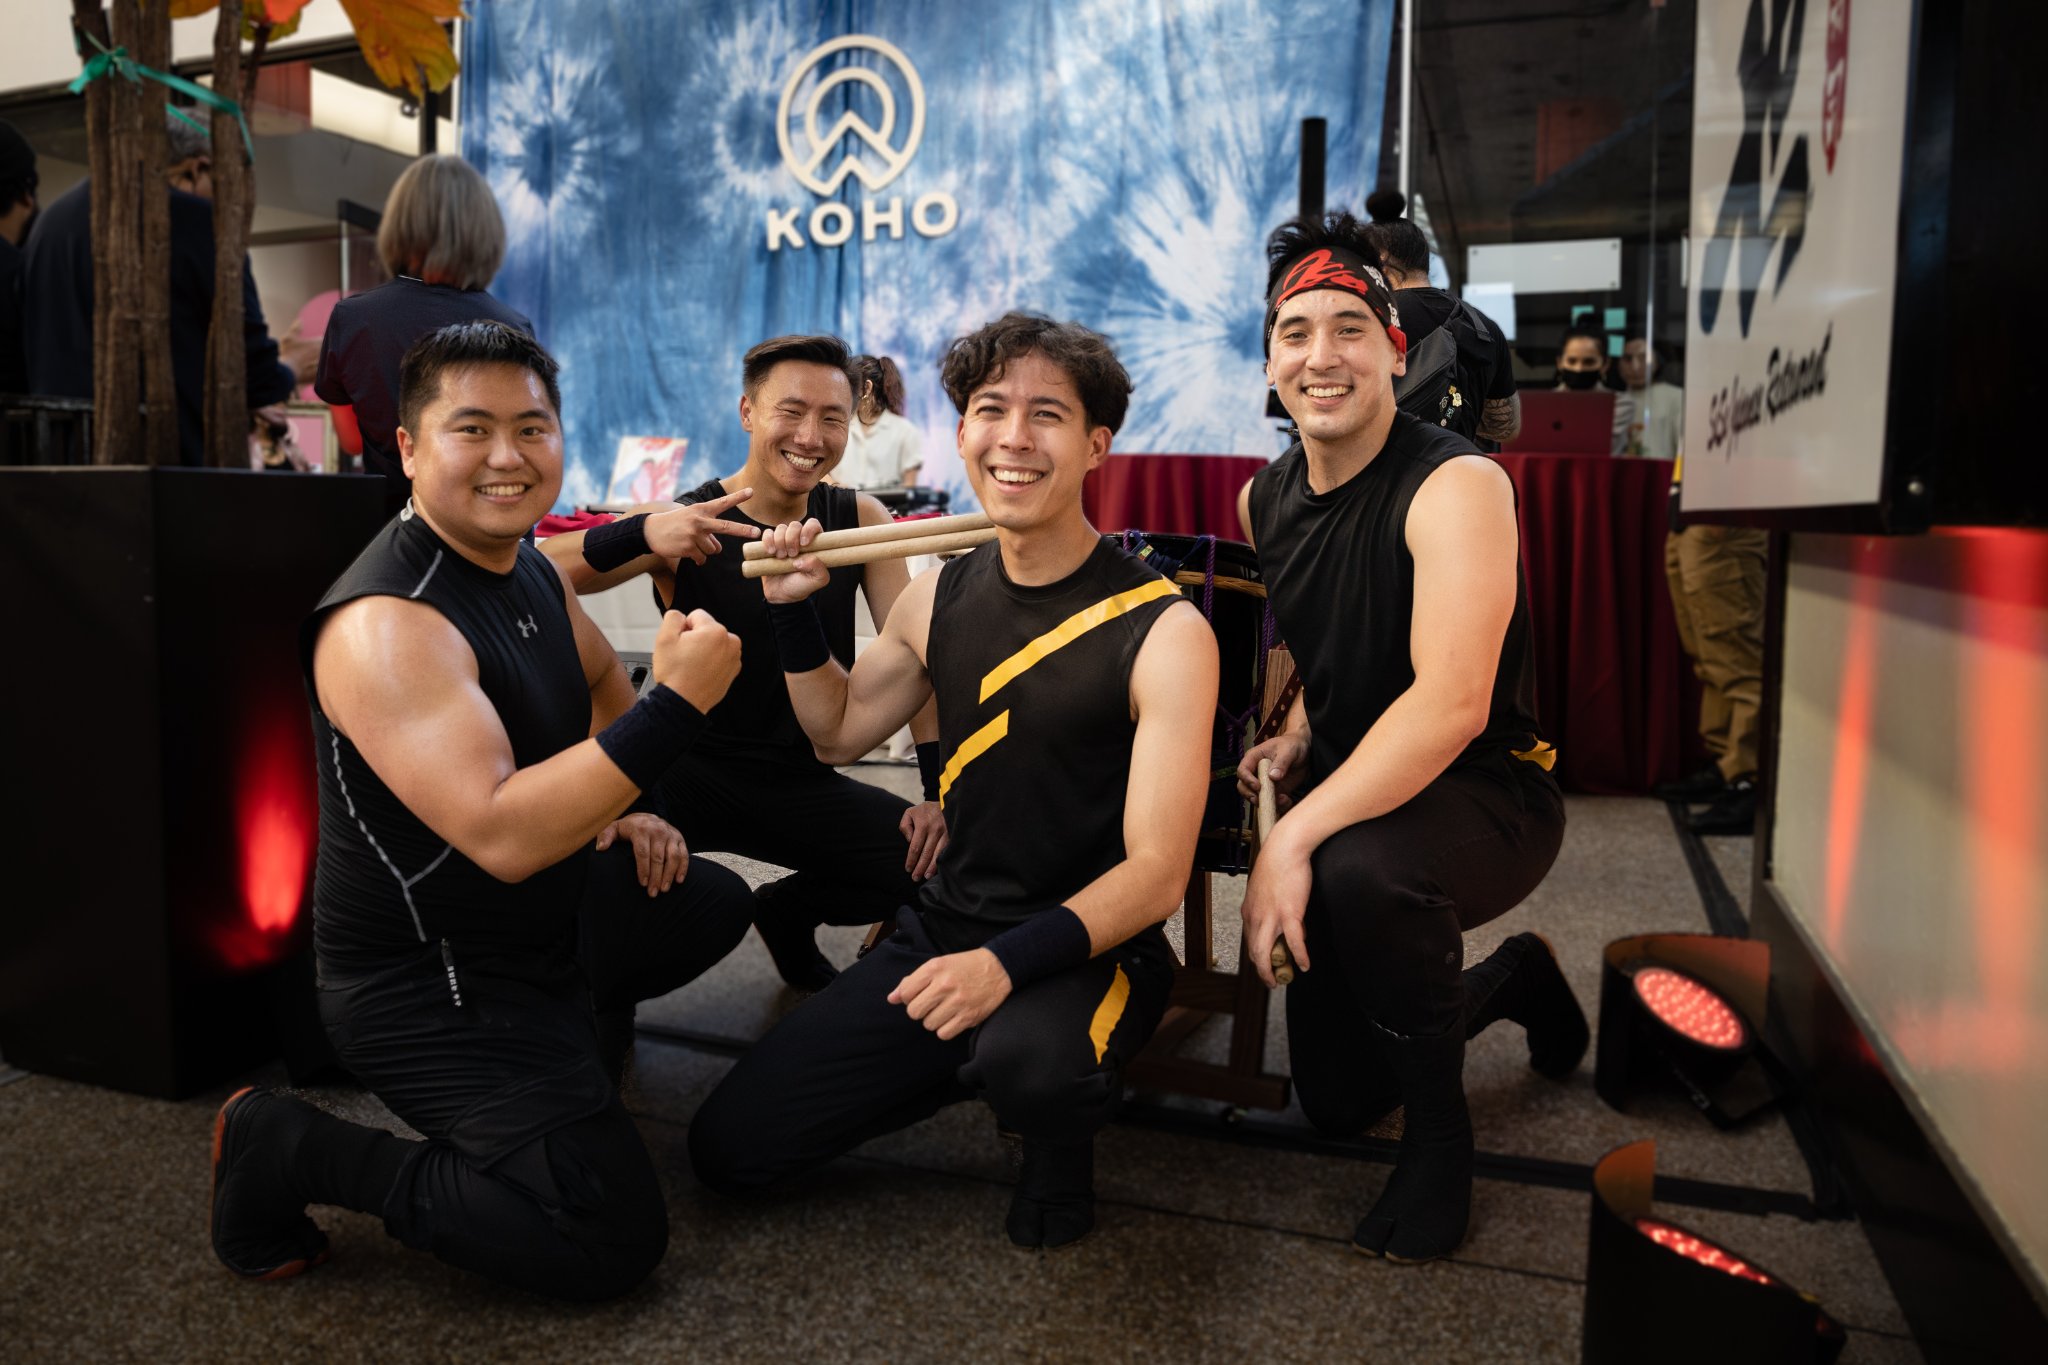 Taiko drummers smiling during the JTCD Koho Launch event